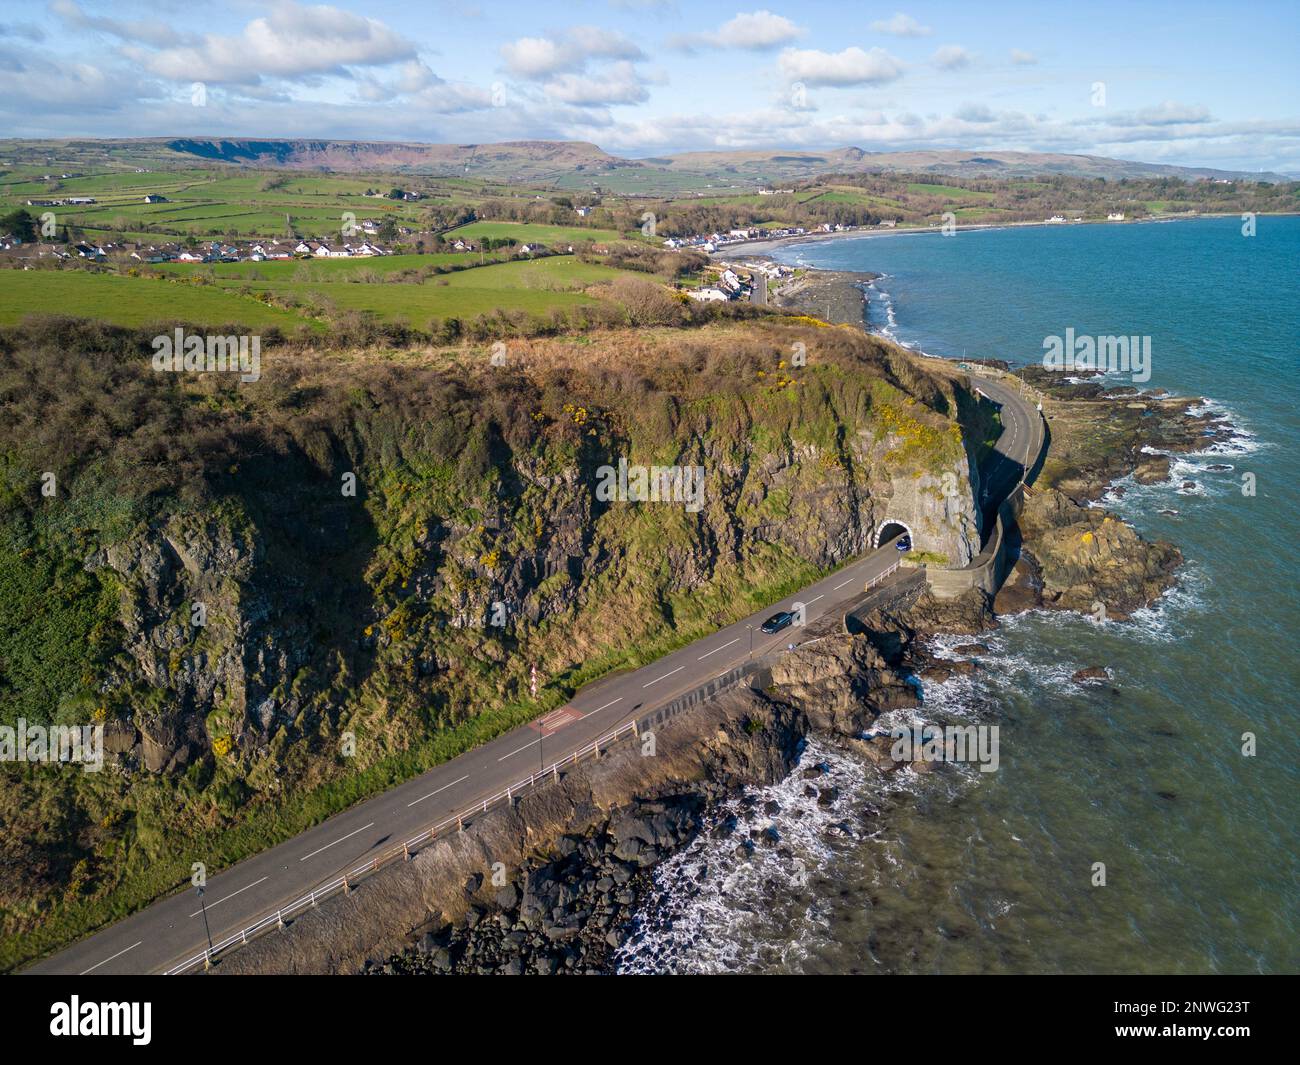 Aerial images of from various locations in and around Larne, County Antrim, Northern Ireland. In this photo, this is the  A2 causeway coastal route coast road which passes through the black arch blackcave tunnel as you leave Larne heading further North. Stock Photo